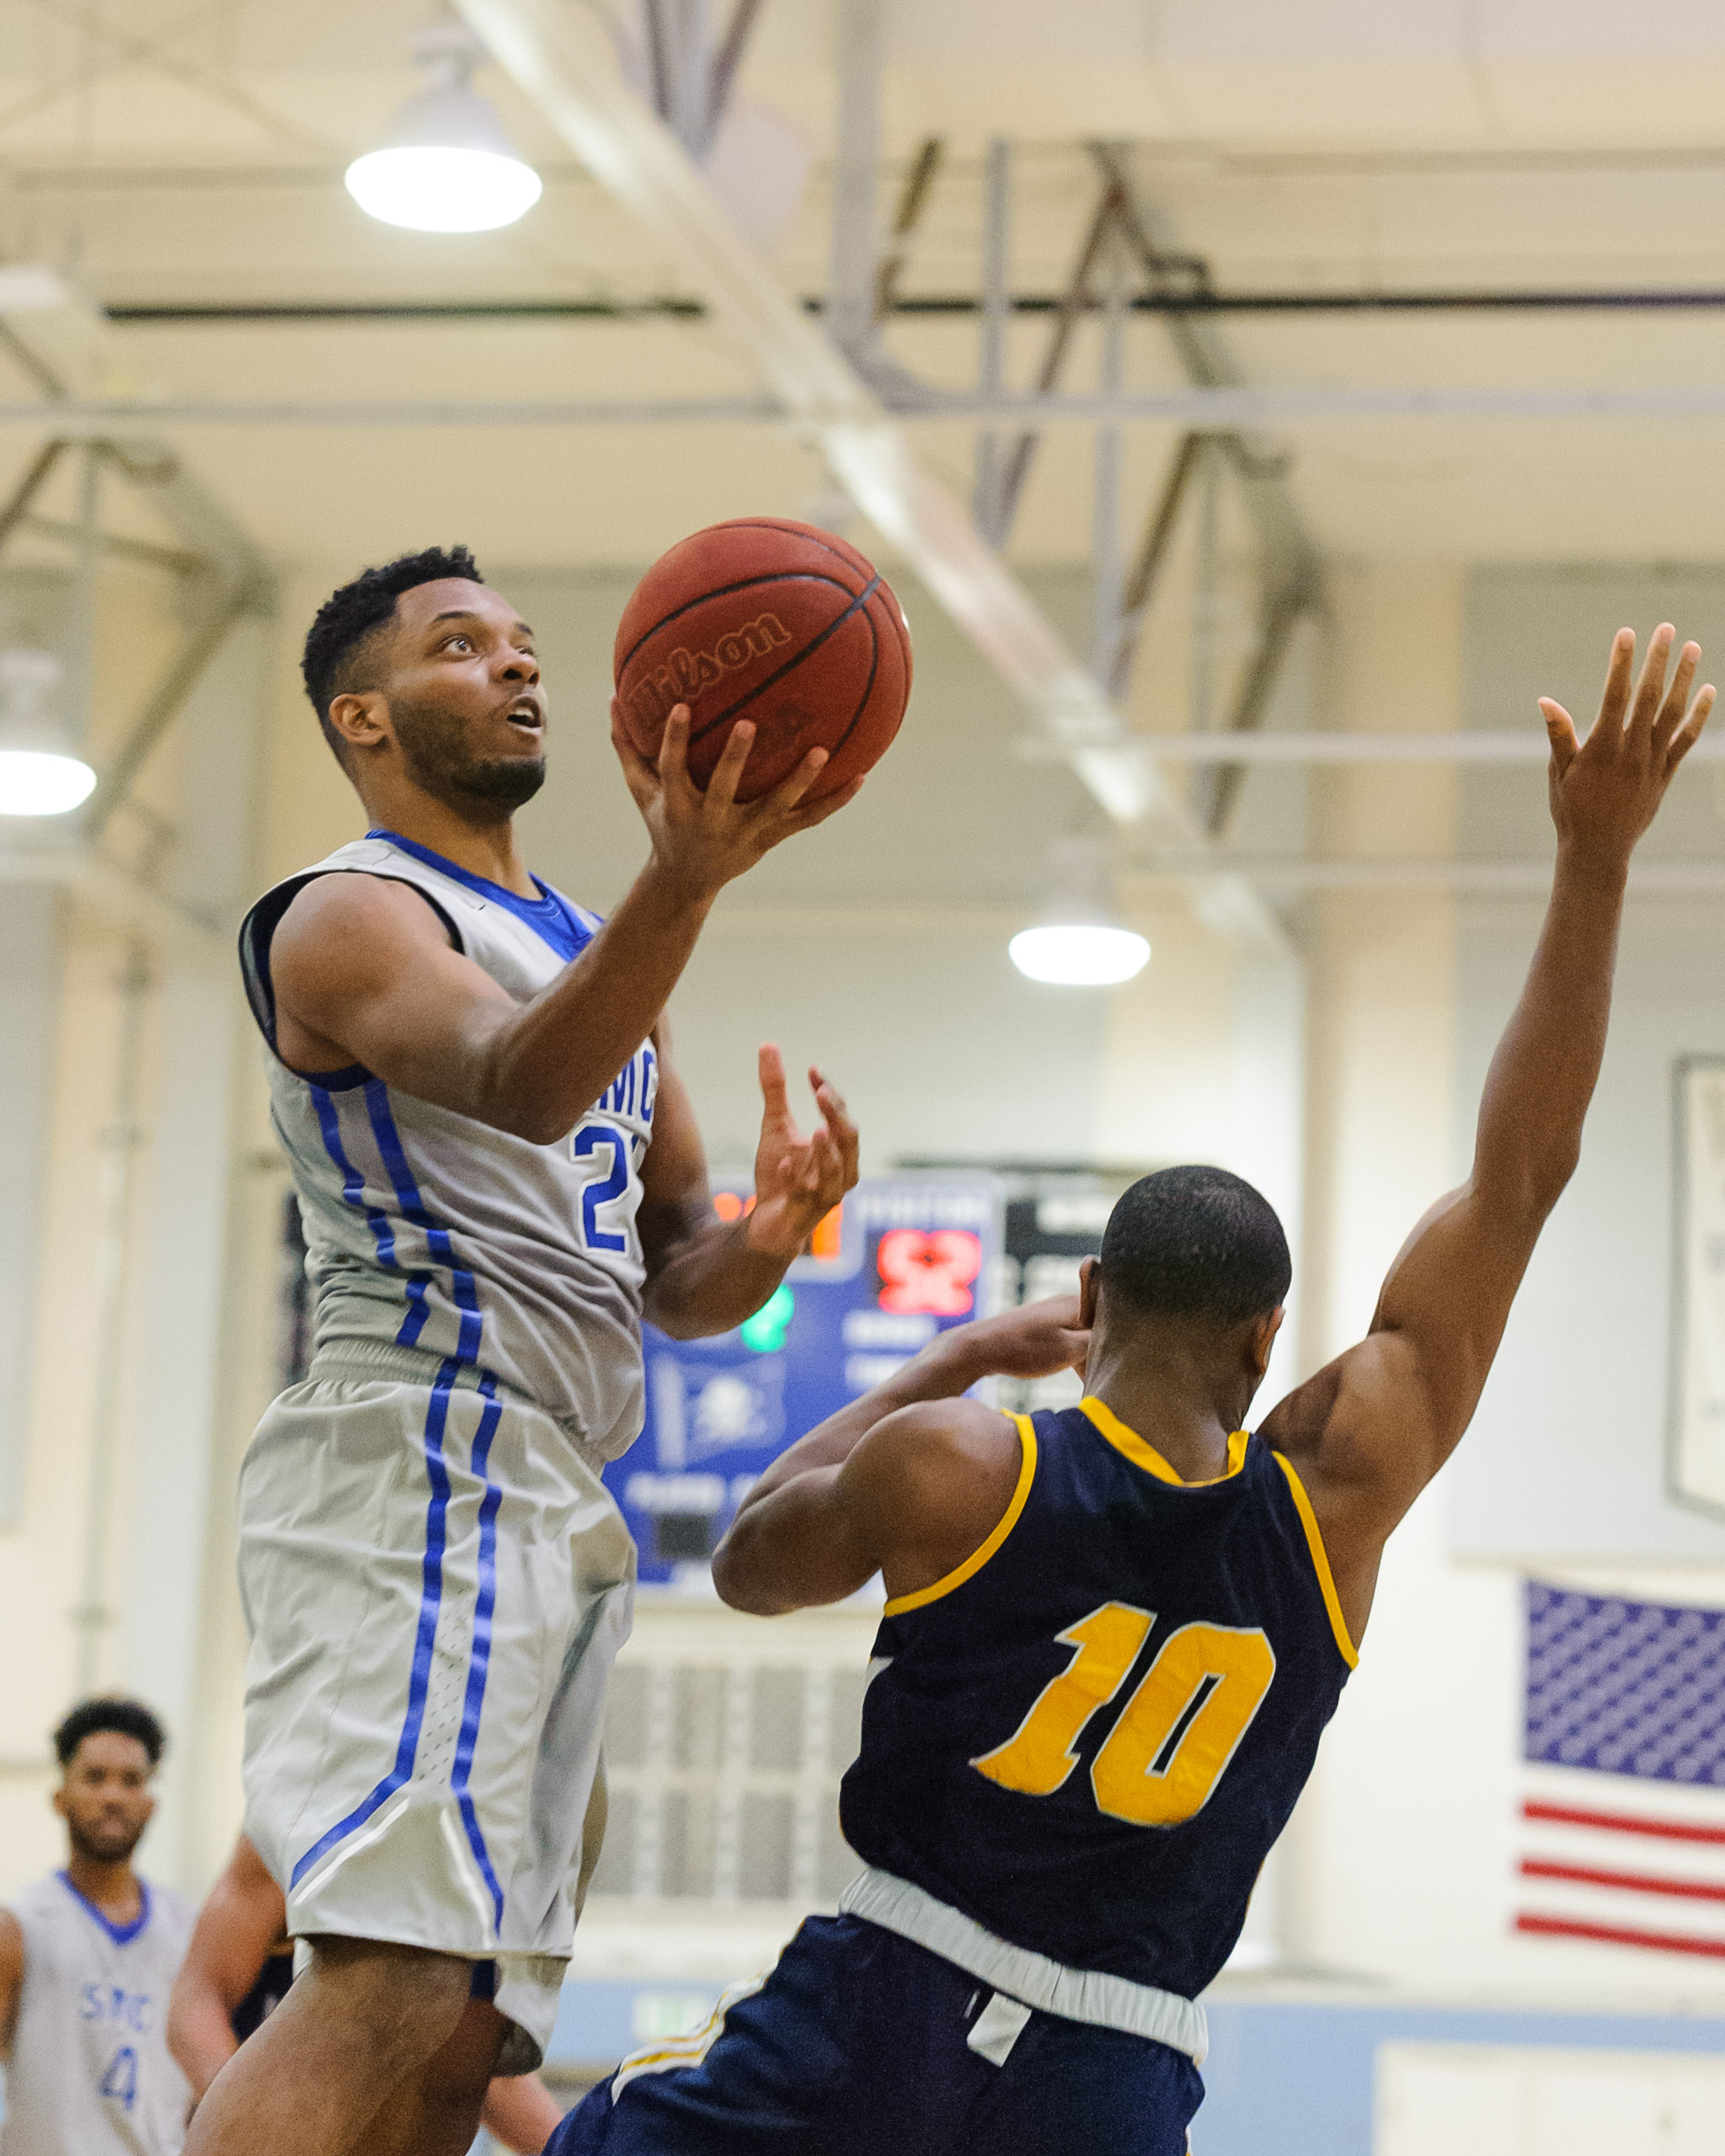  Forward Khalil Taylor (21,Left) of Santa Monica College goes up for a layup while guarded by Michael Kalu (10,Right) of the College of the Canyons. The Santa Monica College Corsairs lose the game 74-72 to the College of the Canyons Cougars. The game